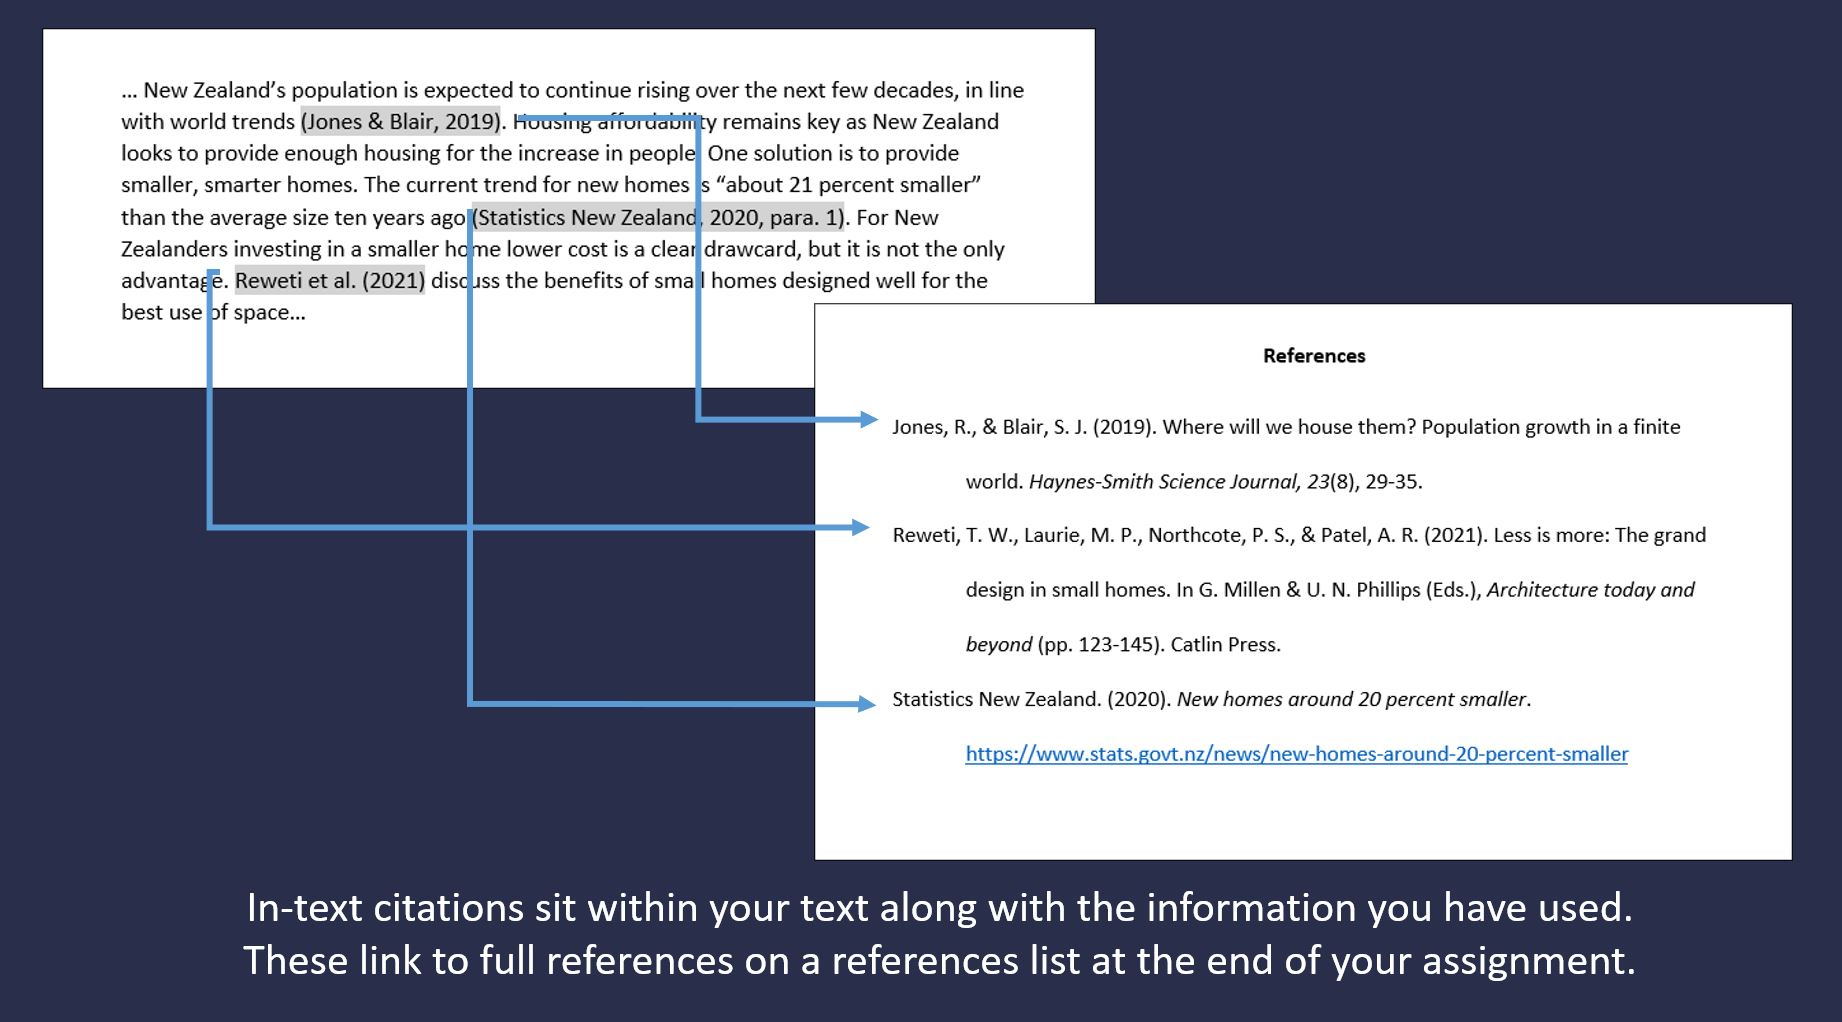 Sample assessment pages which include 3 intext citations linking to reference list entries